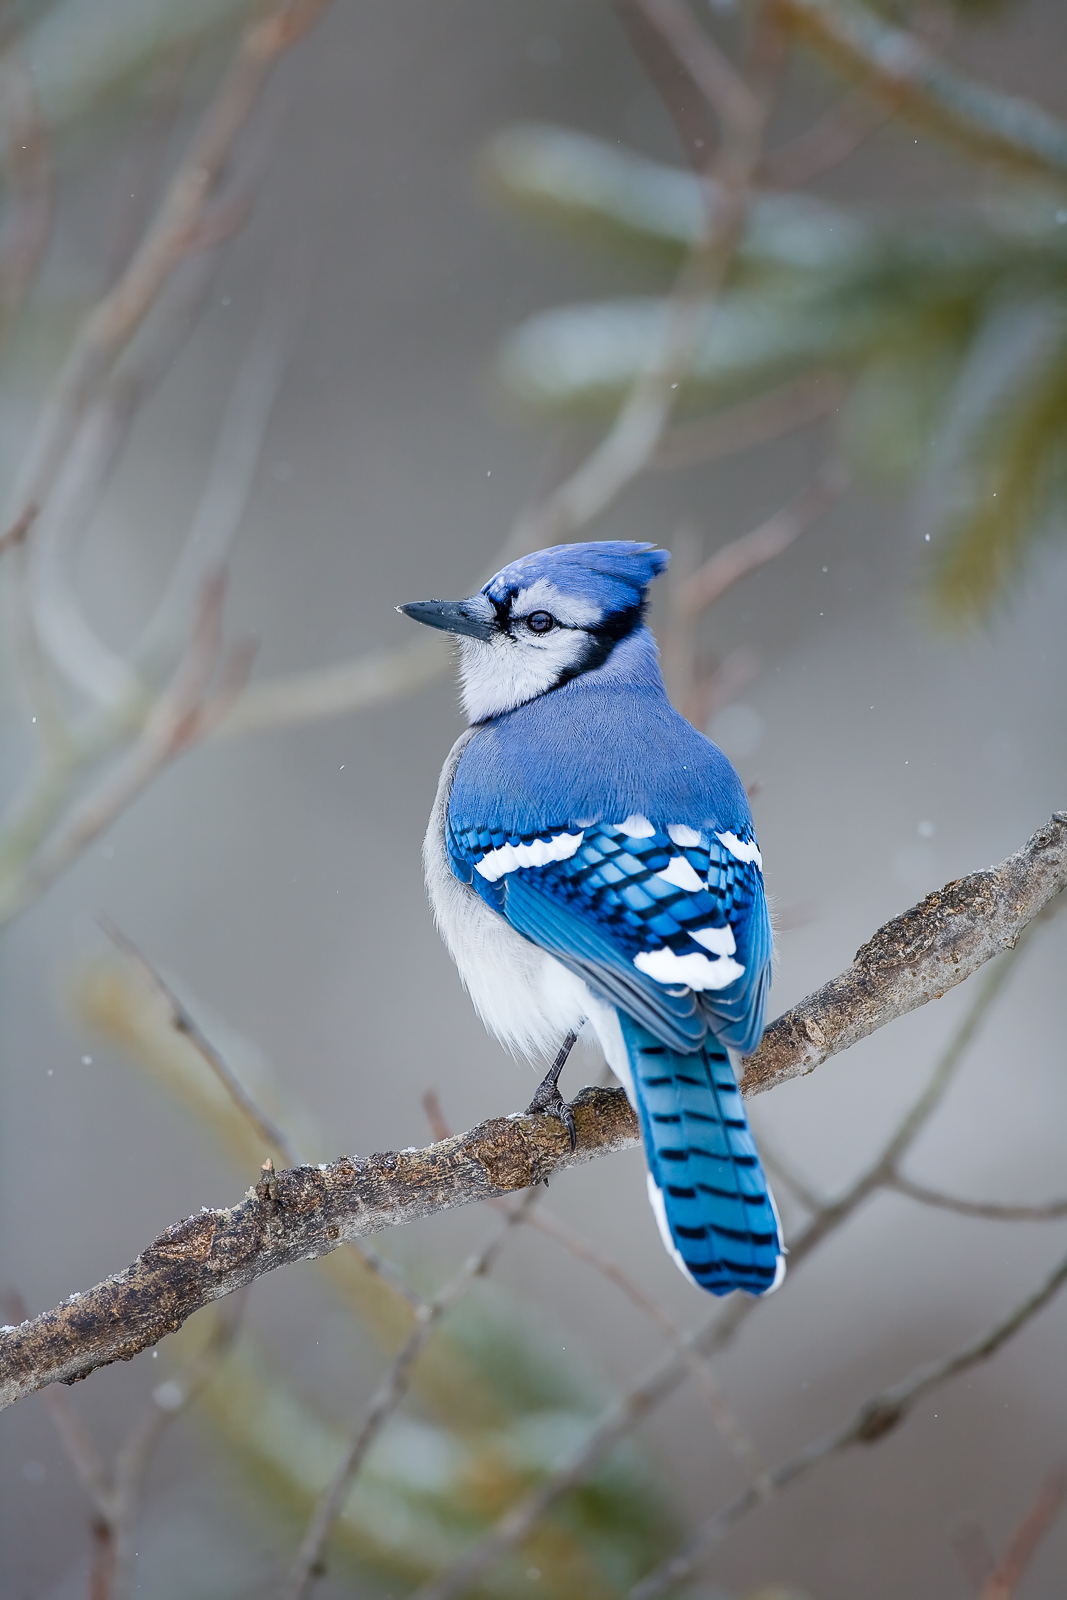 Blue Jays are known for their loud calls and being one of the larger song birds. This one pauses on a branch during a cold February...